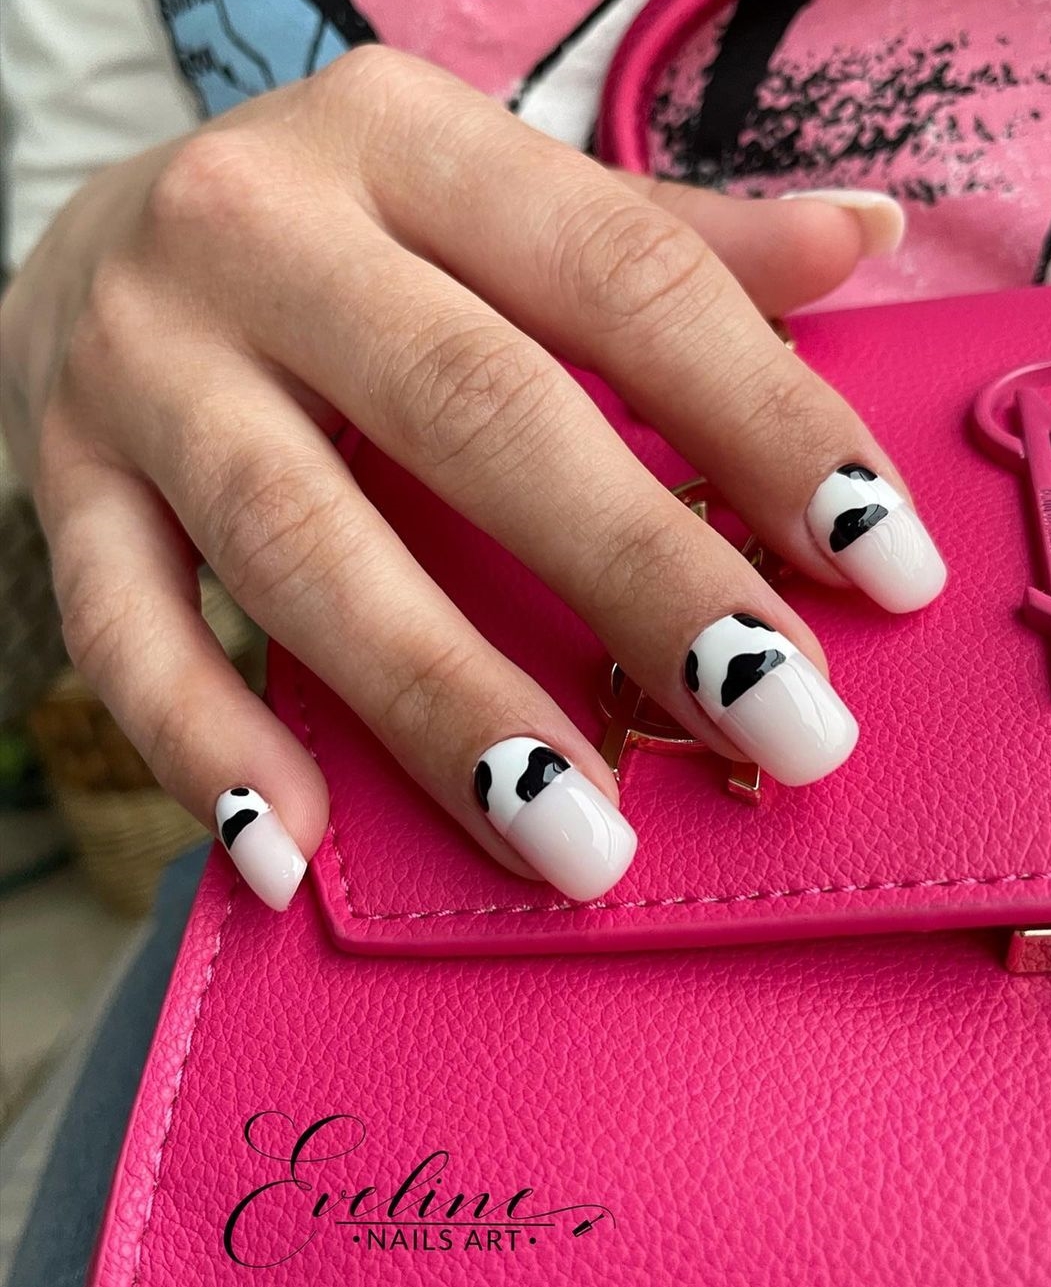 Milky Nails with Black and White Cow Print Design